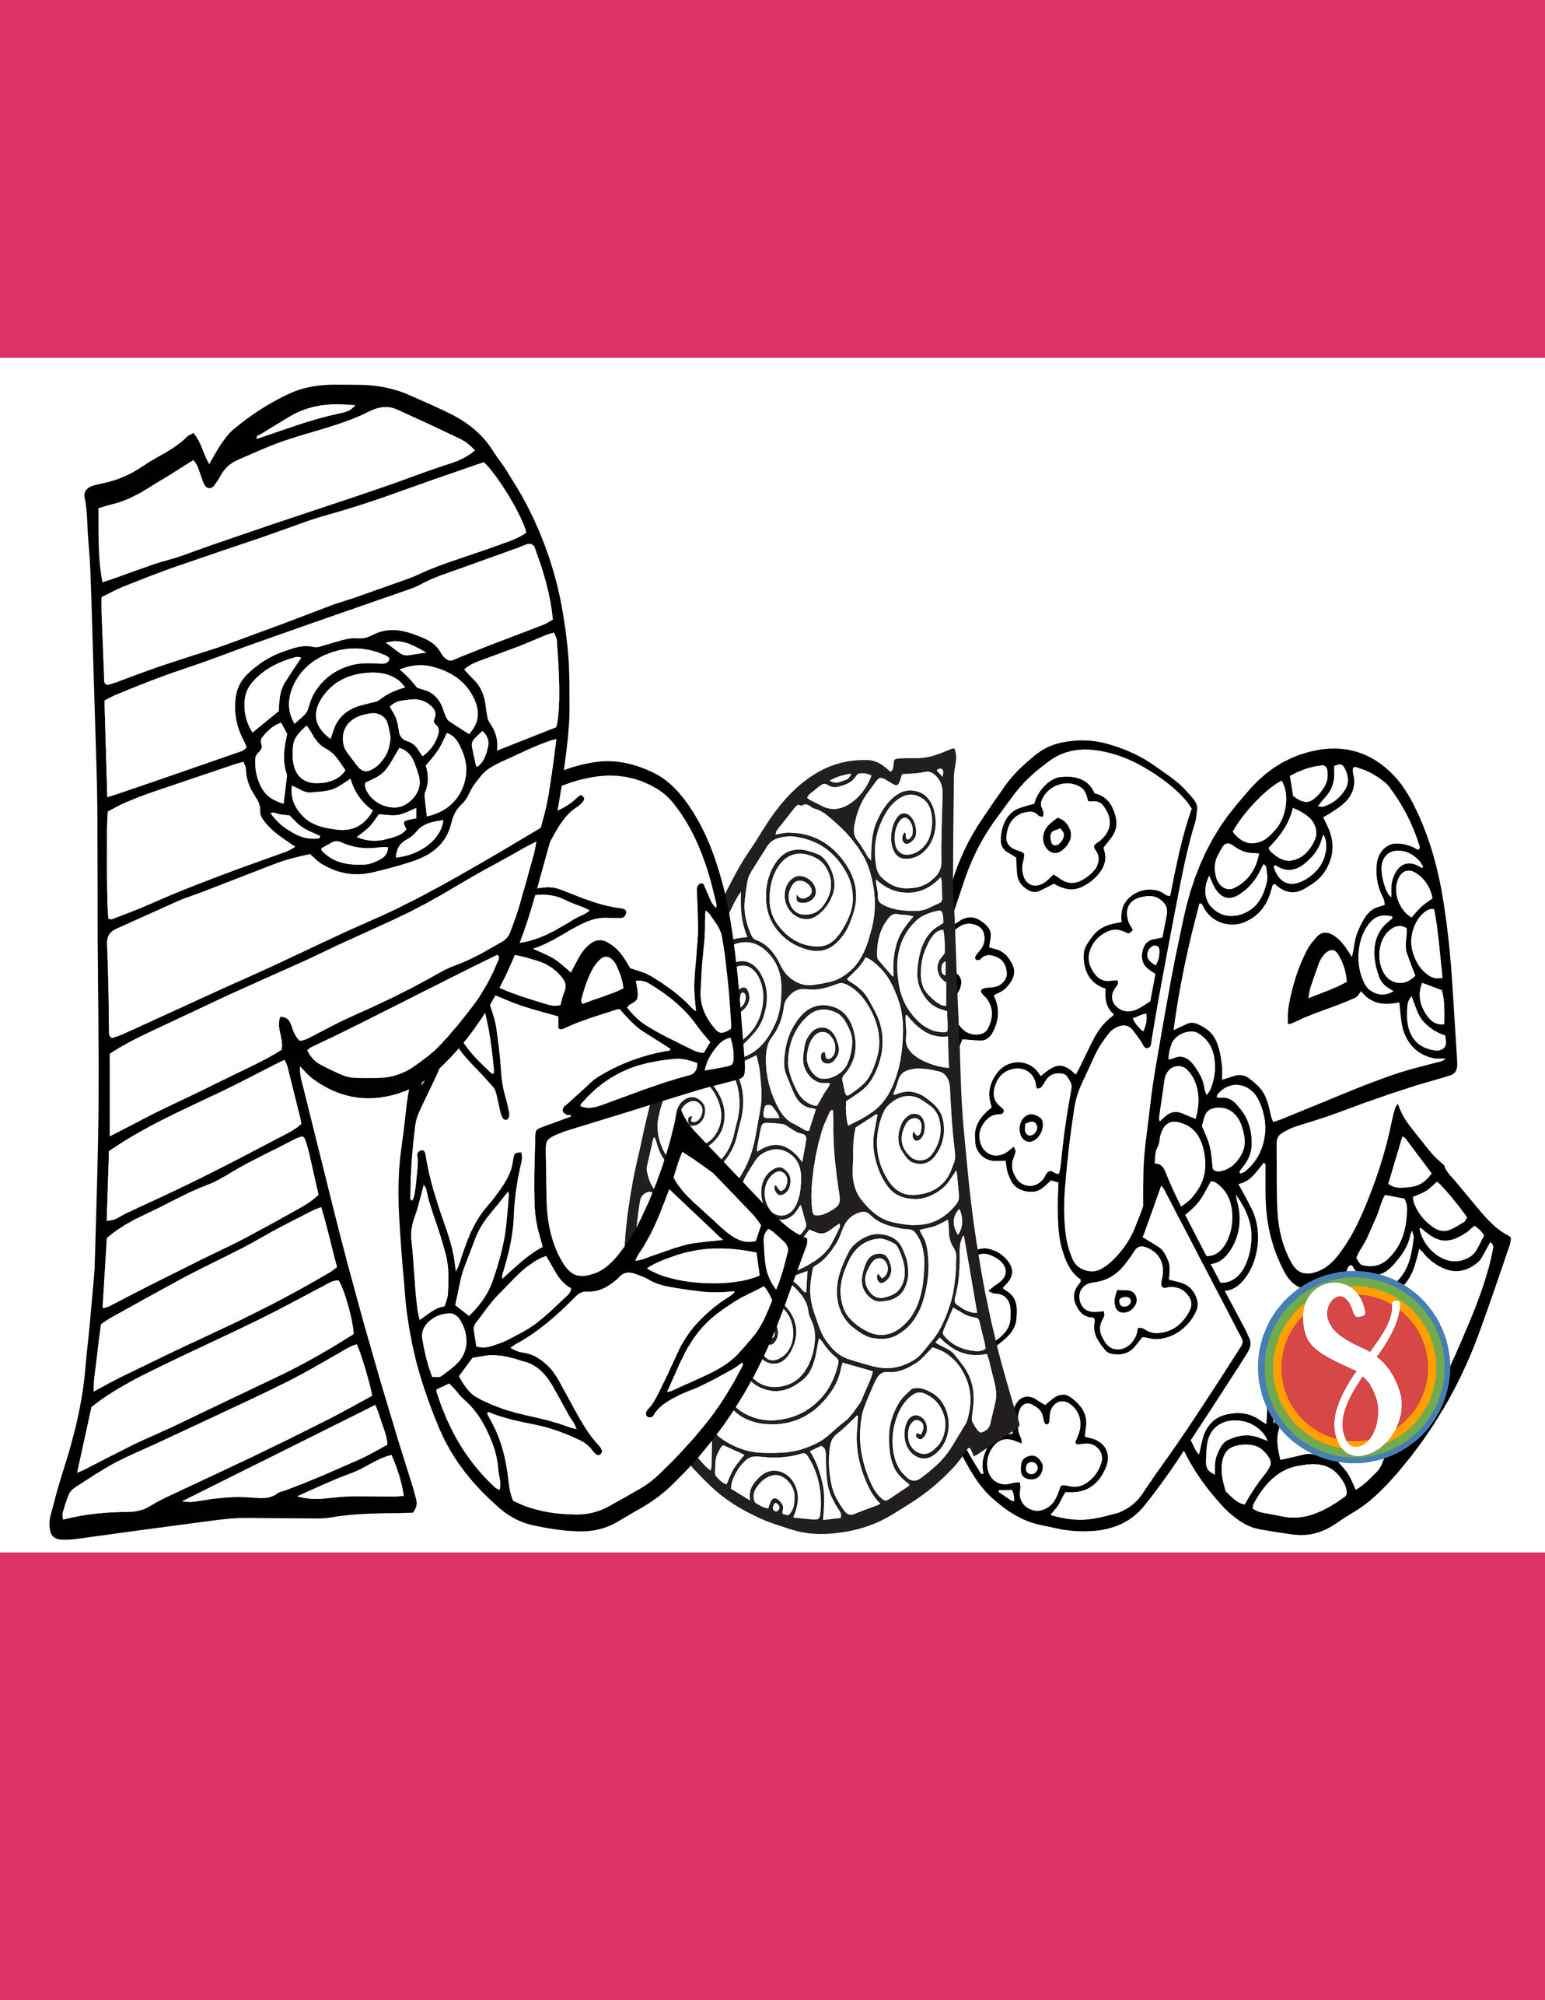 peace coloring page with bubble letters full of flowers to color